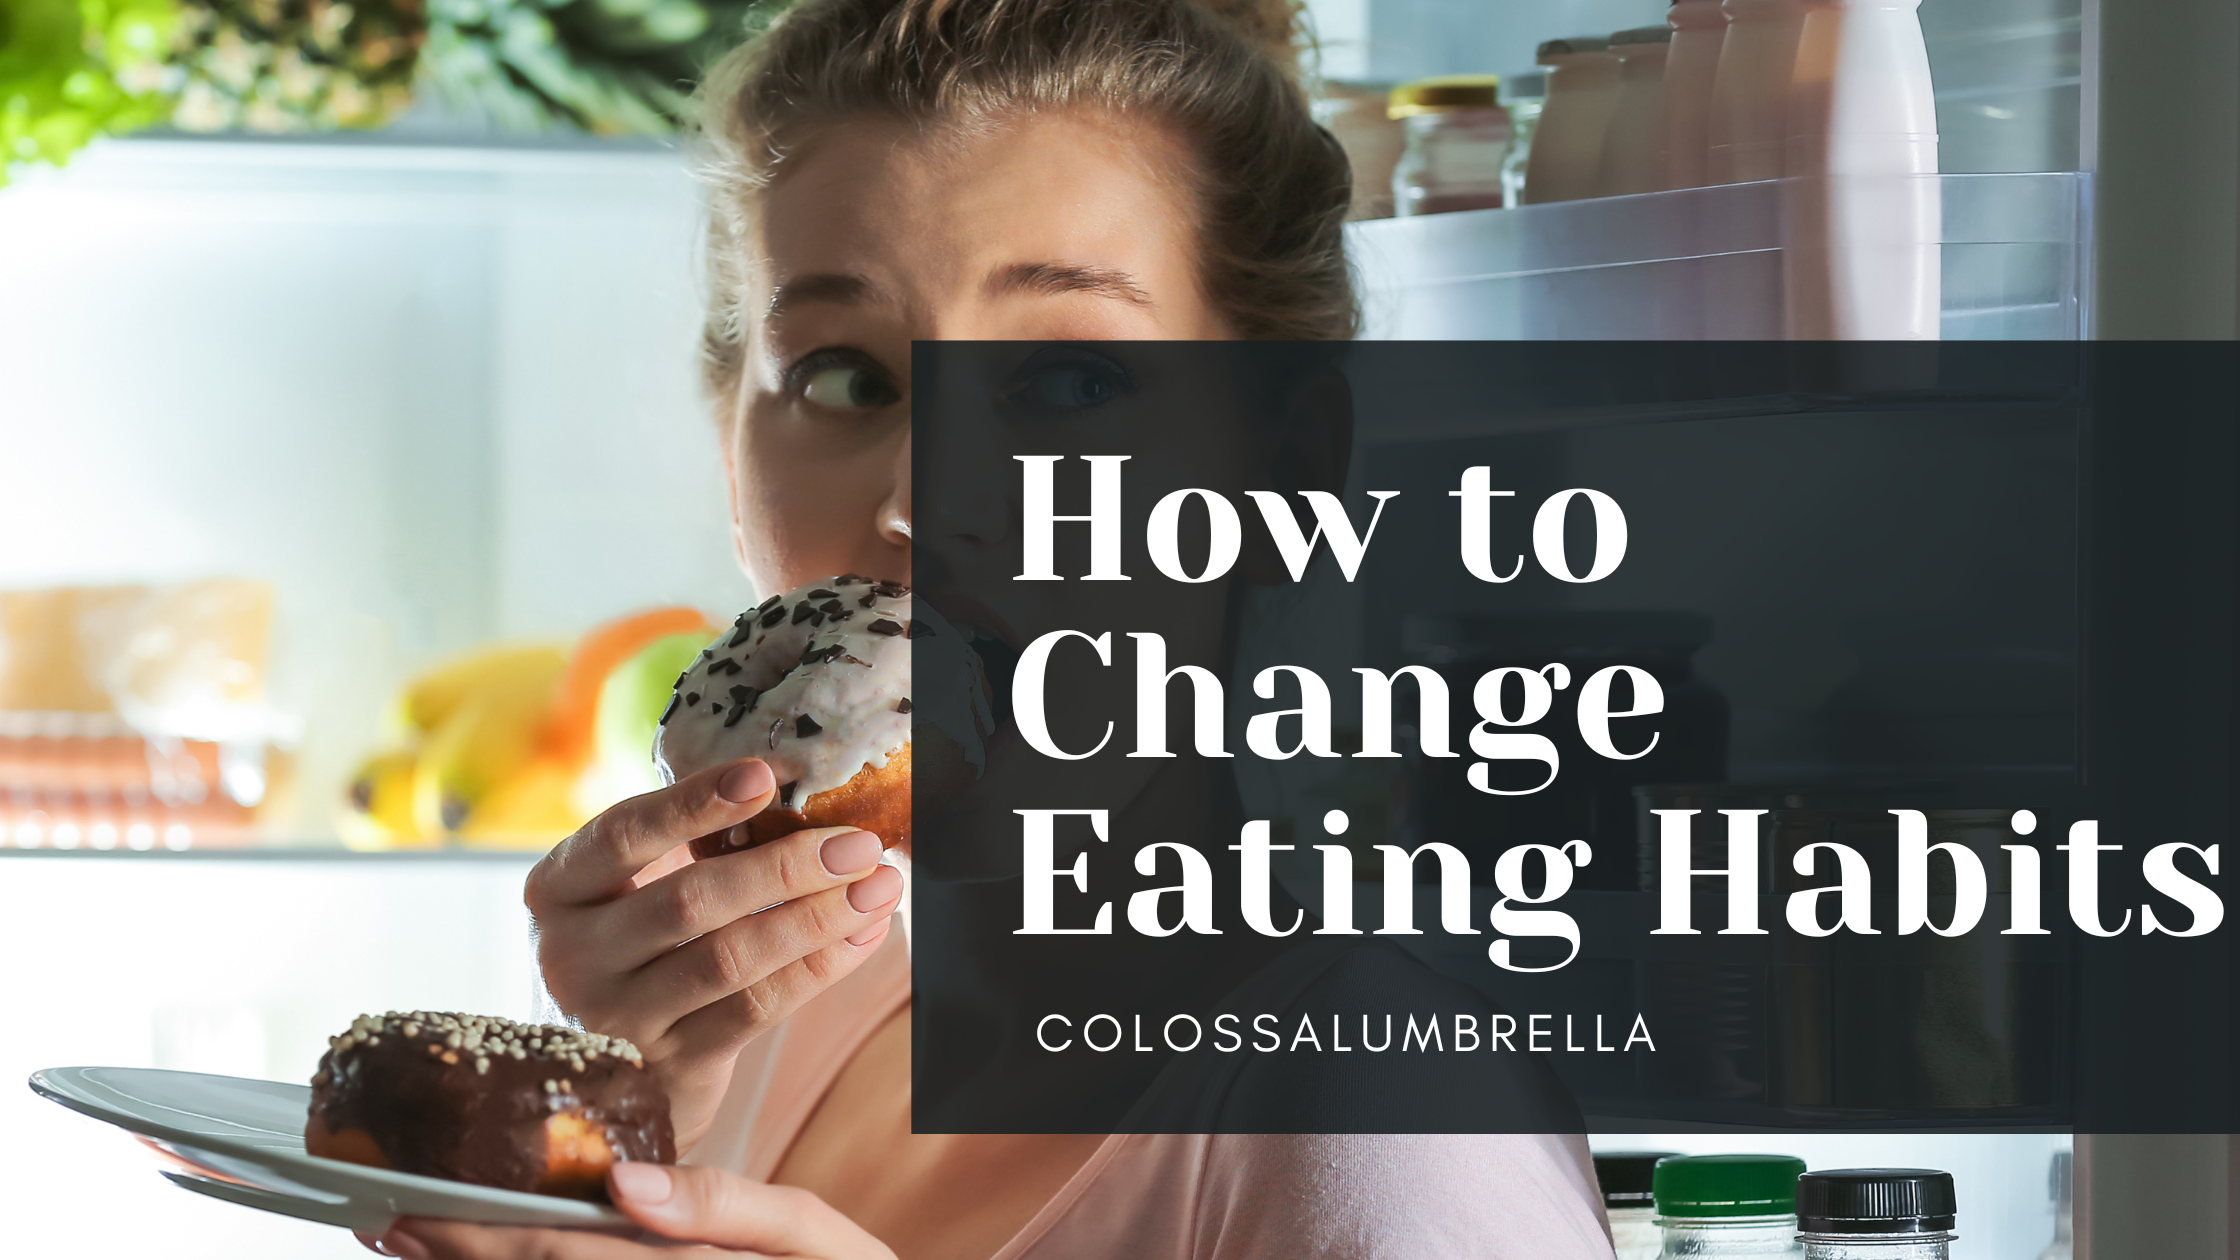 How to Change Eating Habits